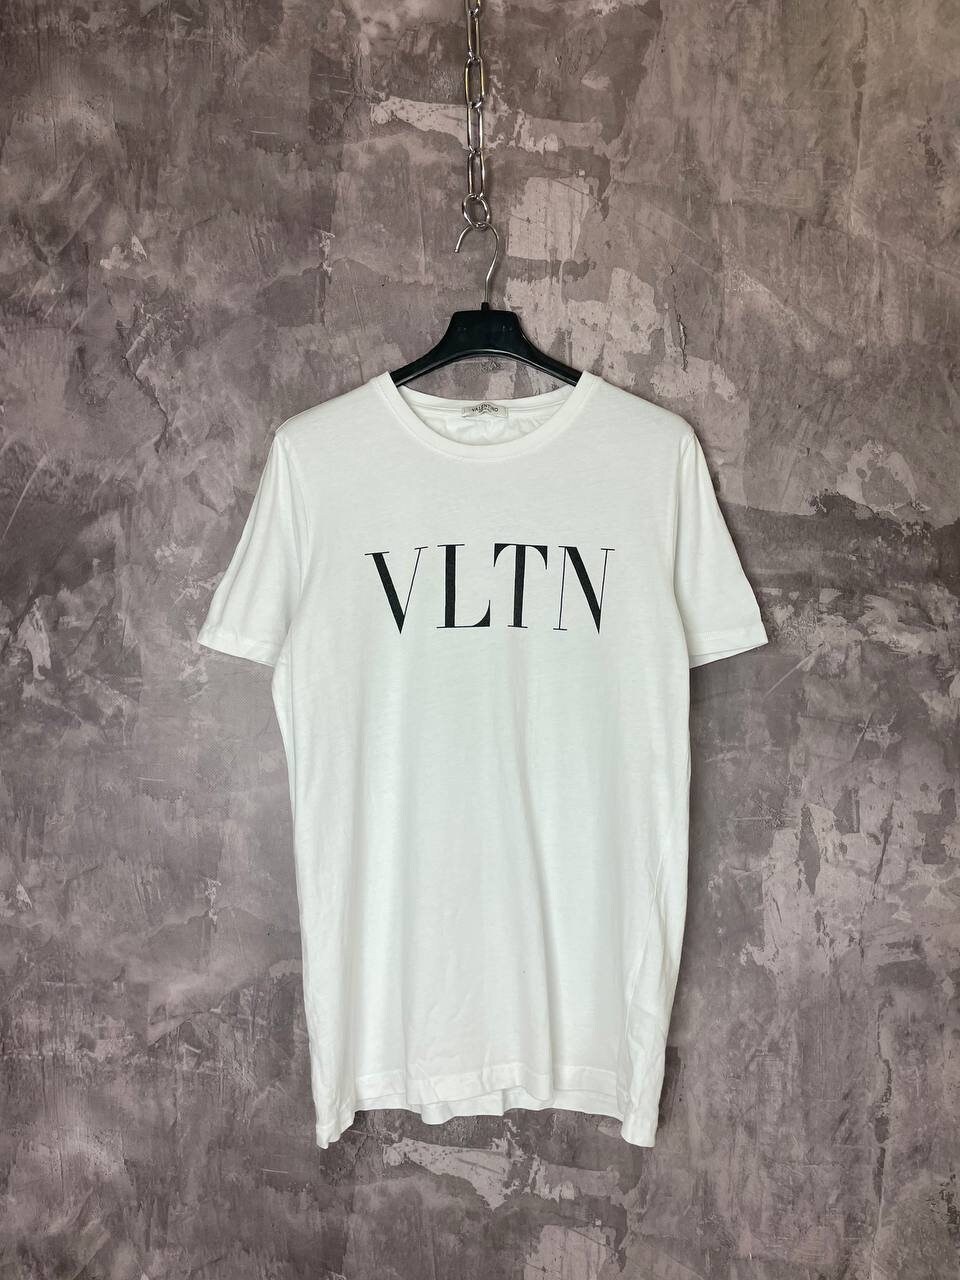 Louis Vuitton bunny T-Shirt in black and white , - Depop